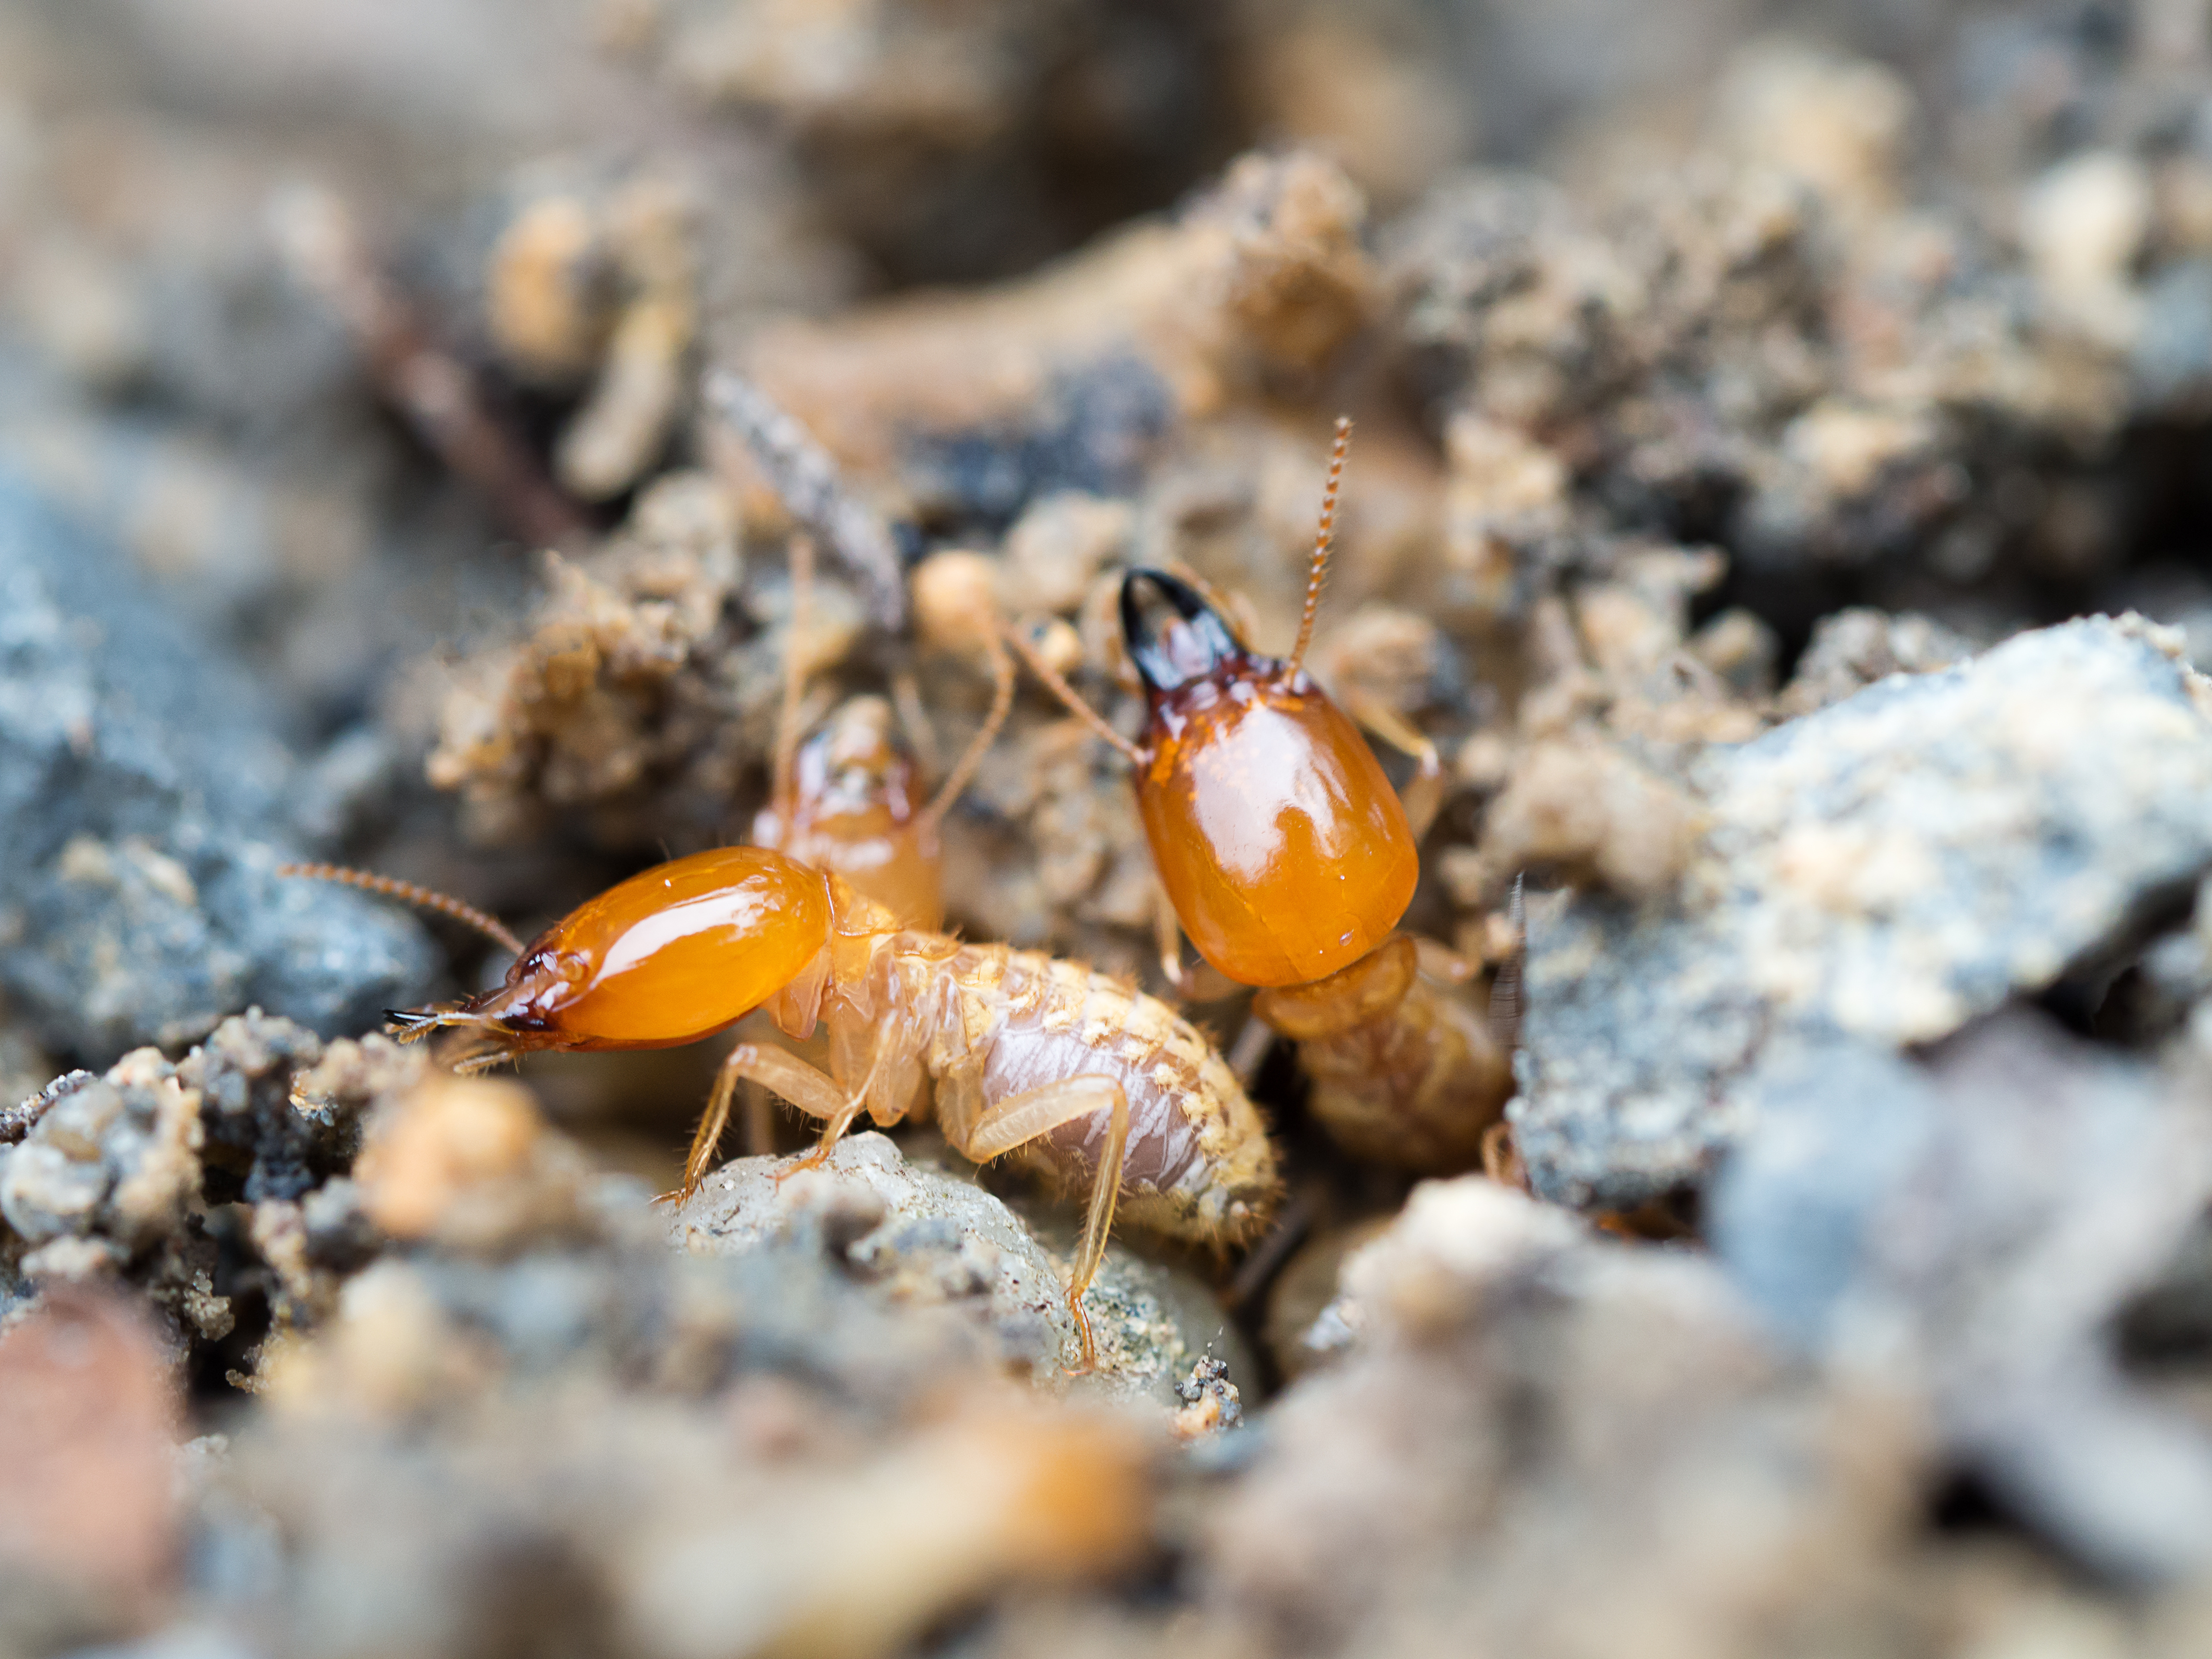 Formosan termites - contact GGA Pest Management Waco today for termite removal!